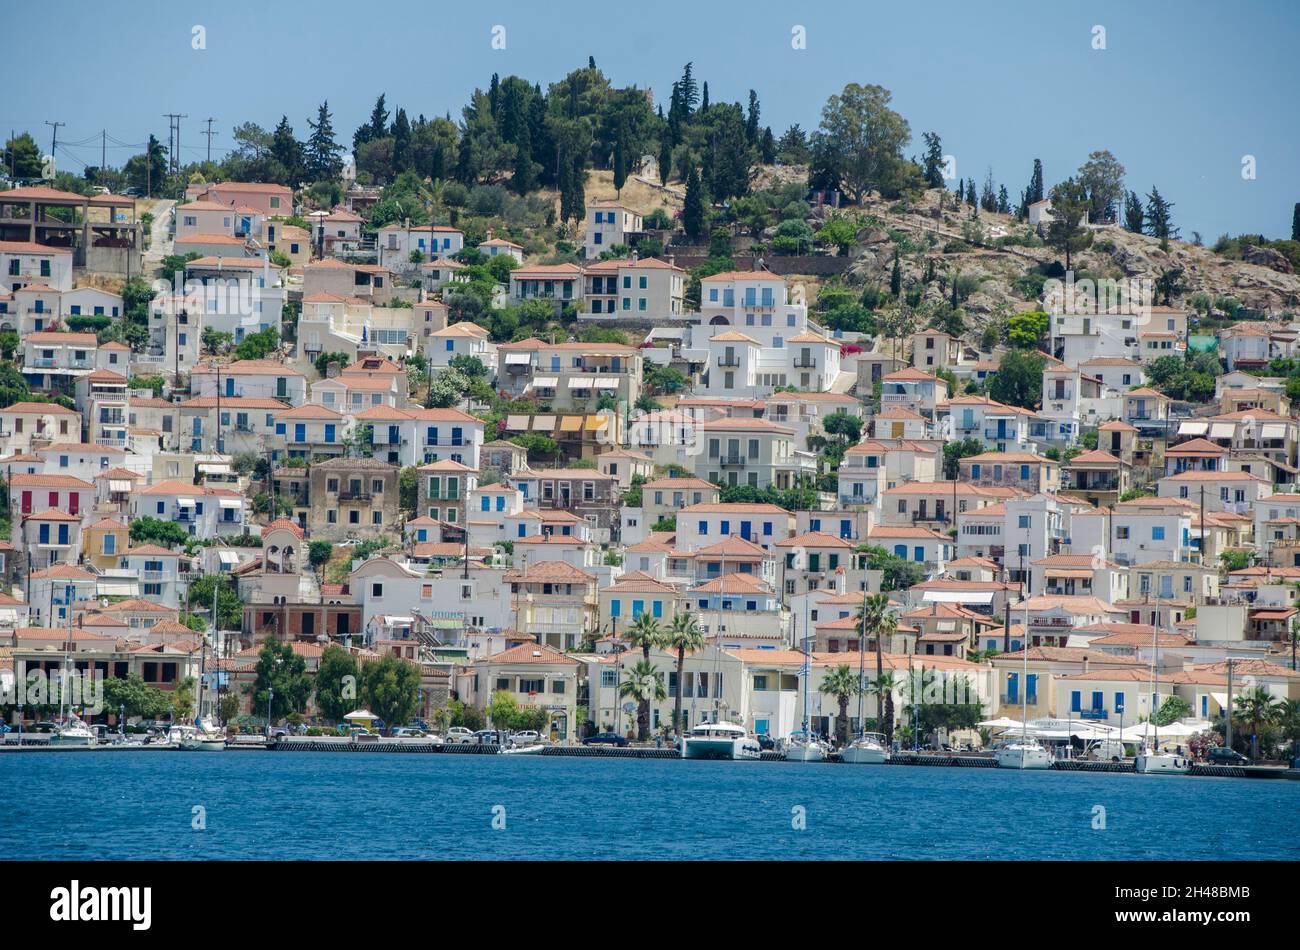 The Greek Island of Aegina is one of the Saronic Islands of Greece in the Saronic Gulf, 27 kilometres (17 miles) from Athens. Tradition derives the na Stock Photo